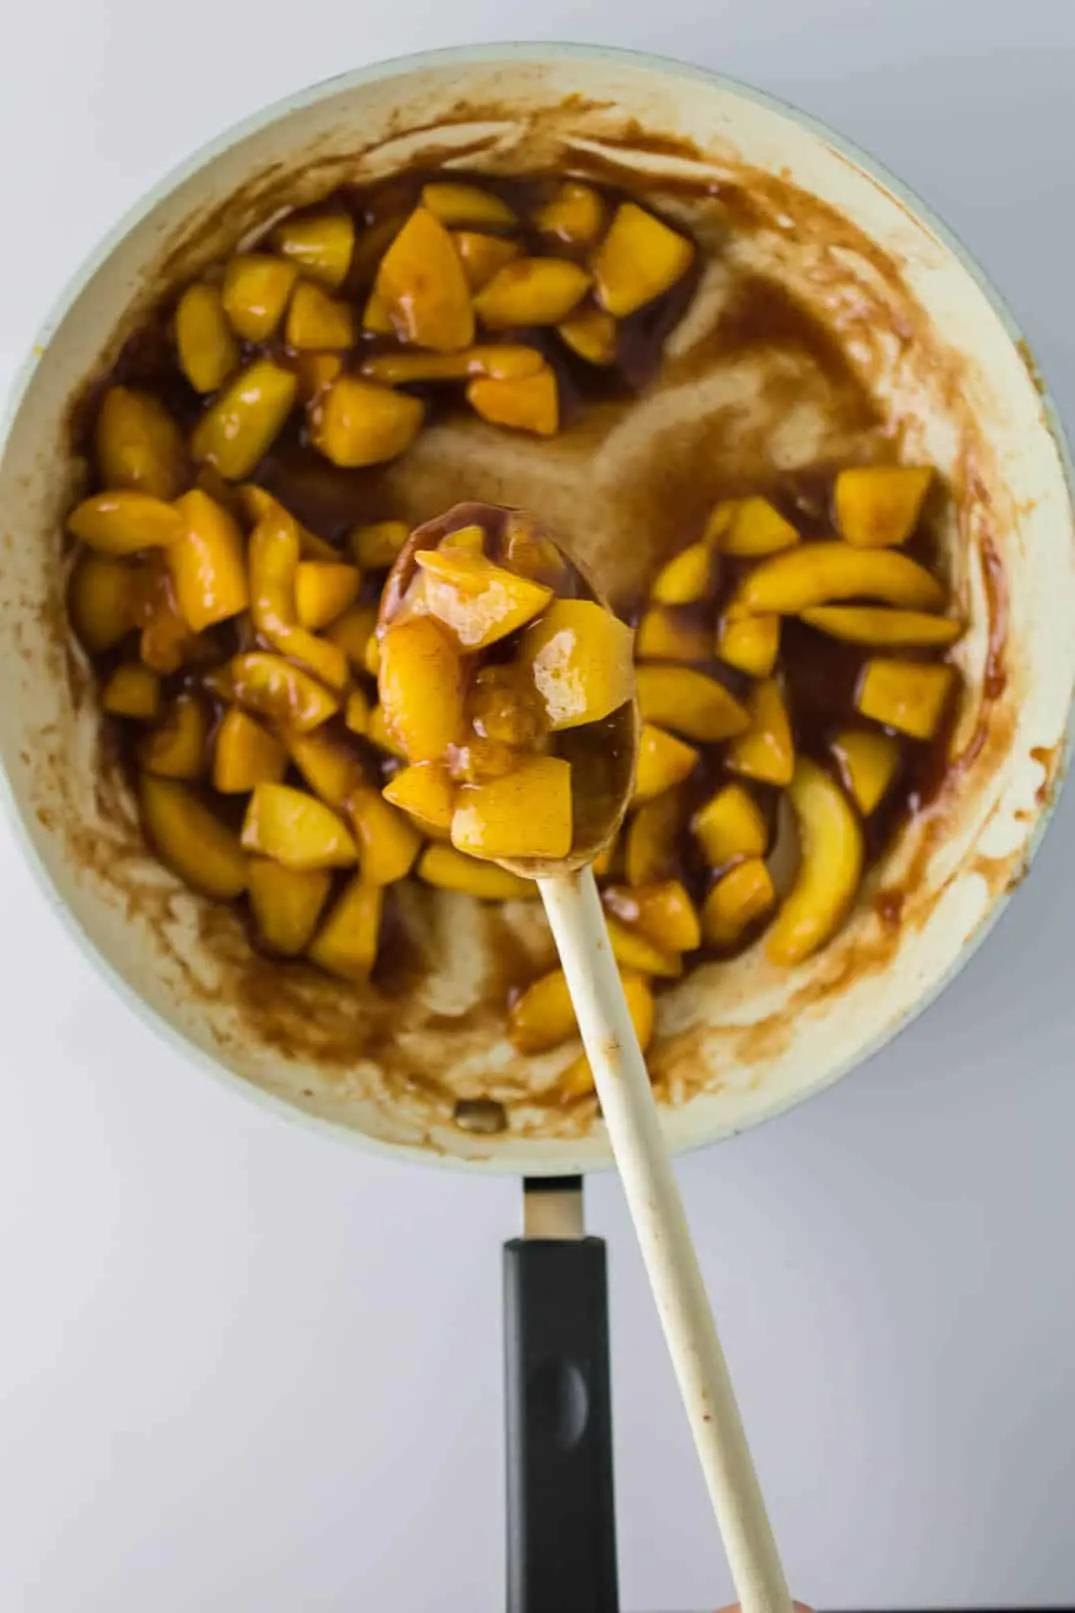 Cooking peach filling for Peach Cobbler Egg Rolls and stirring with a wooden spoon